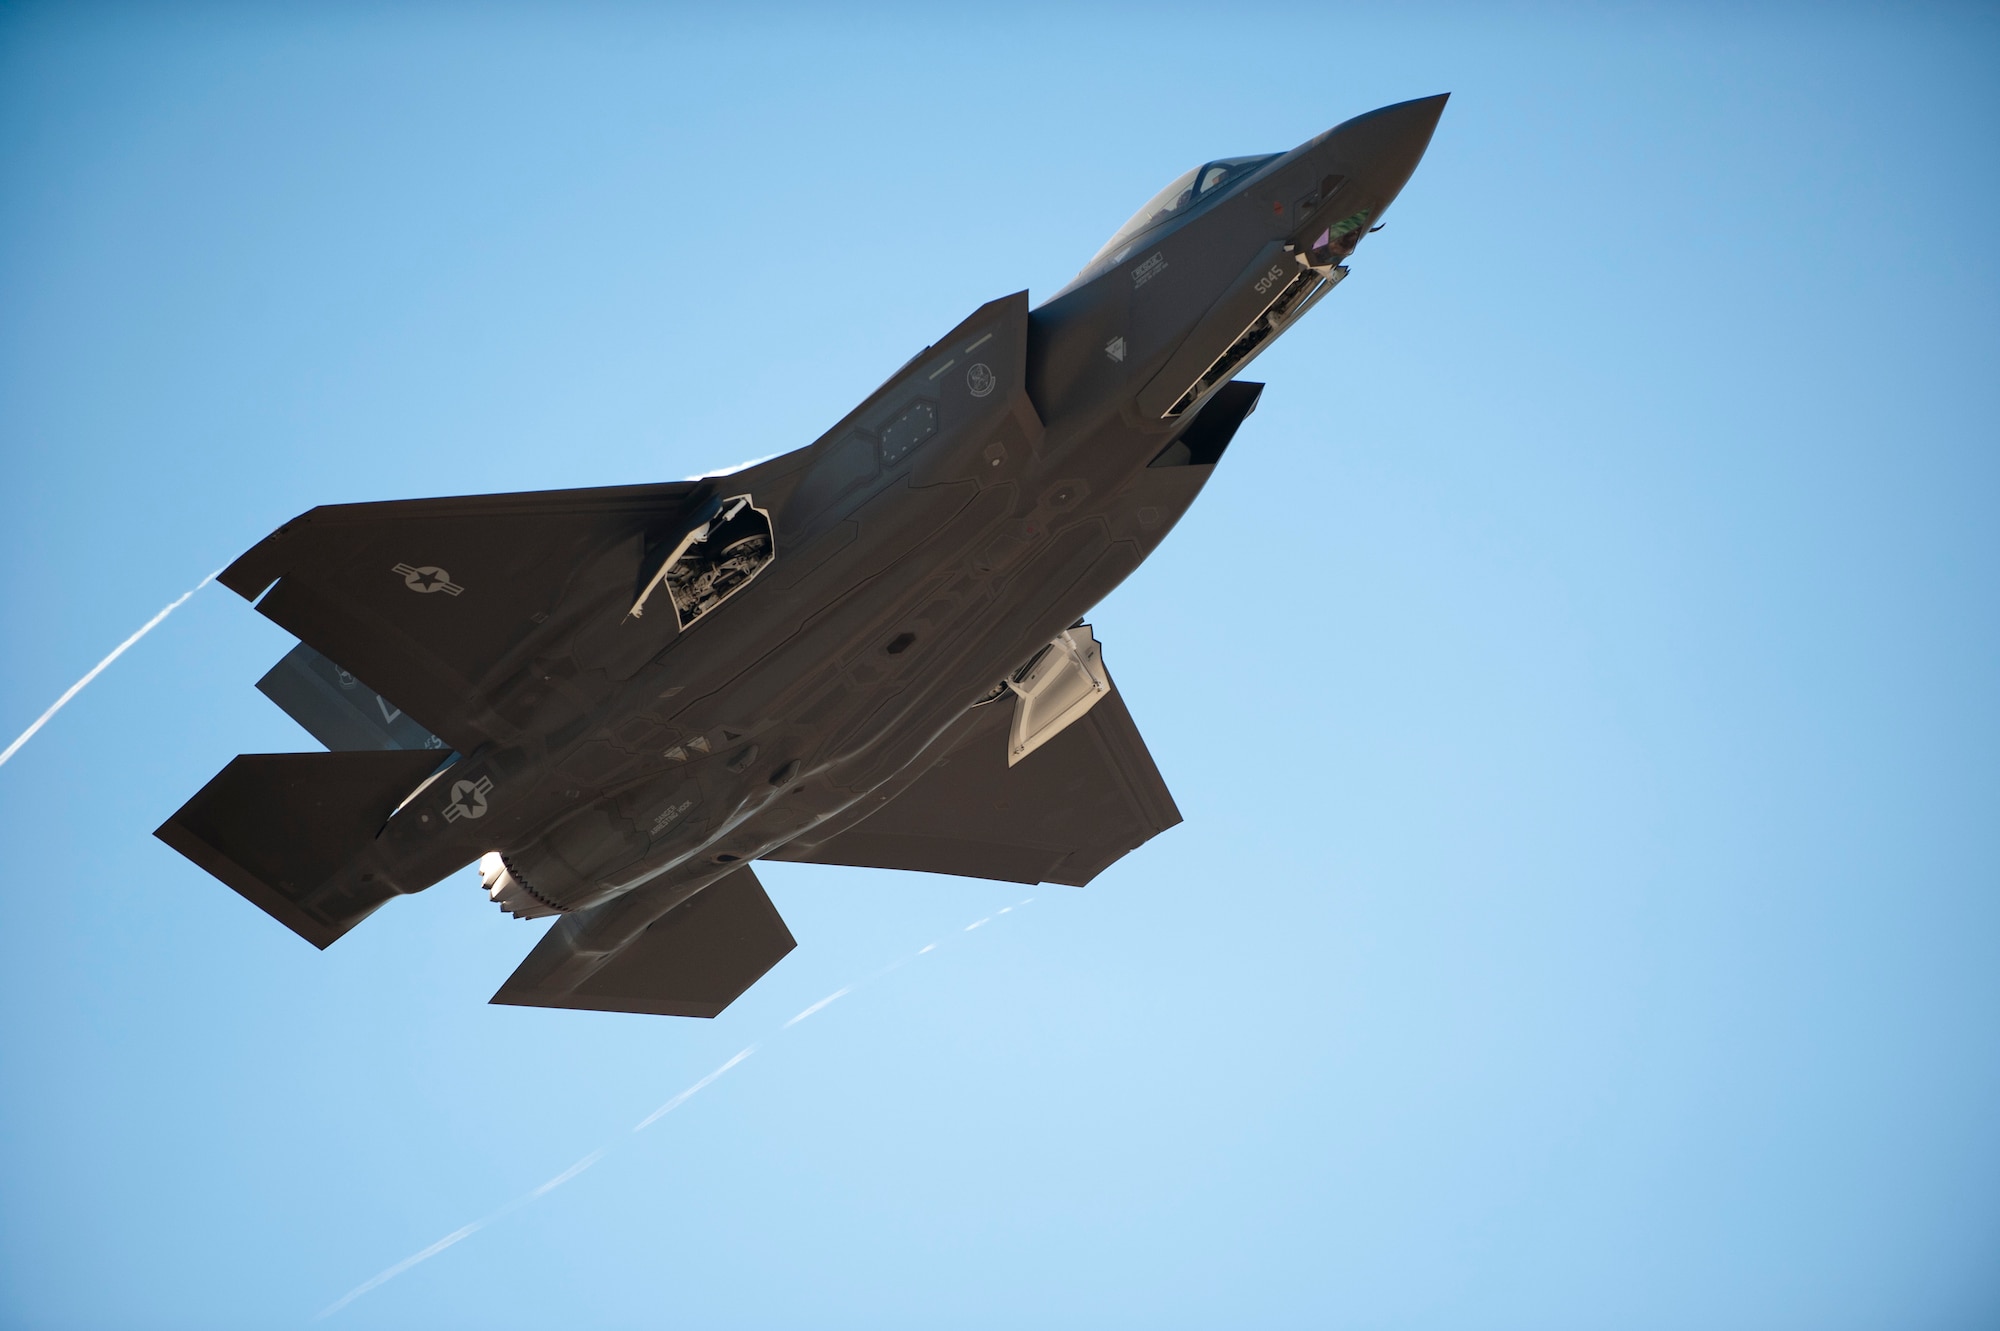 The 17th Luke Air Force Base F-35A Lightning II jet arrived at Luke AFB Dec.
18, 2014.  The jet accompanied the first Royal Australian Air Force F-35A
Lightning II to arrive here. (U.S. Air Force photo by Staff Sgt. Staci
Miller)
